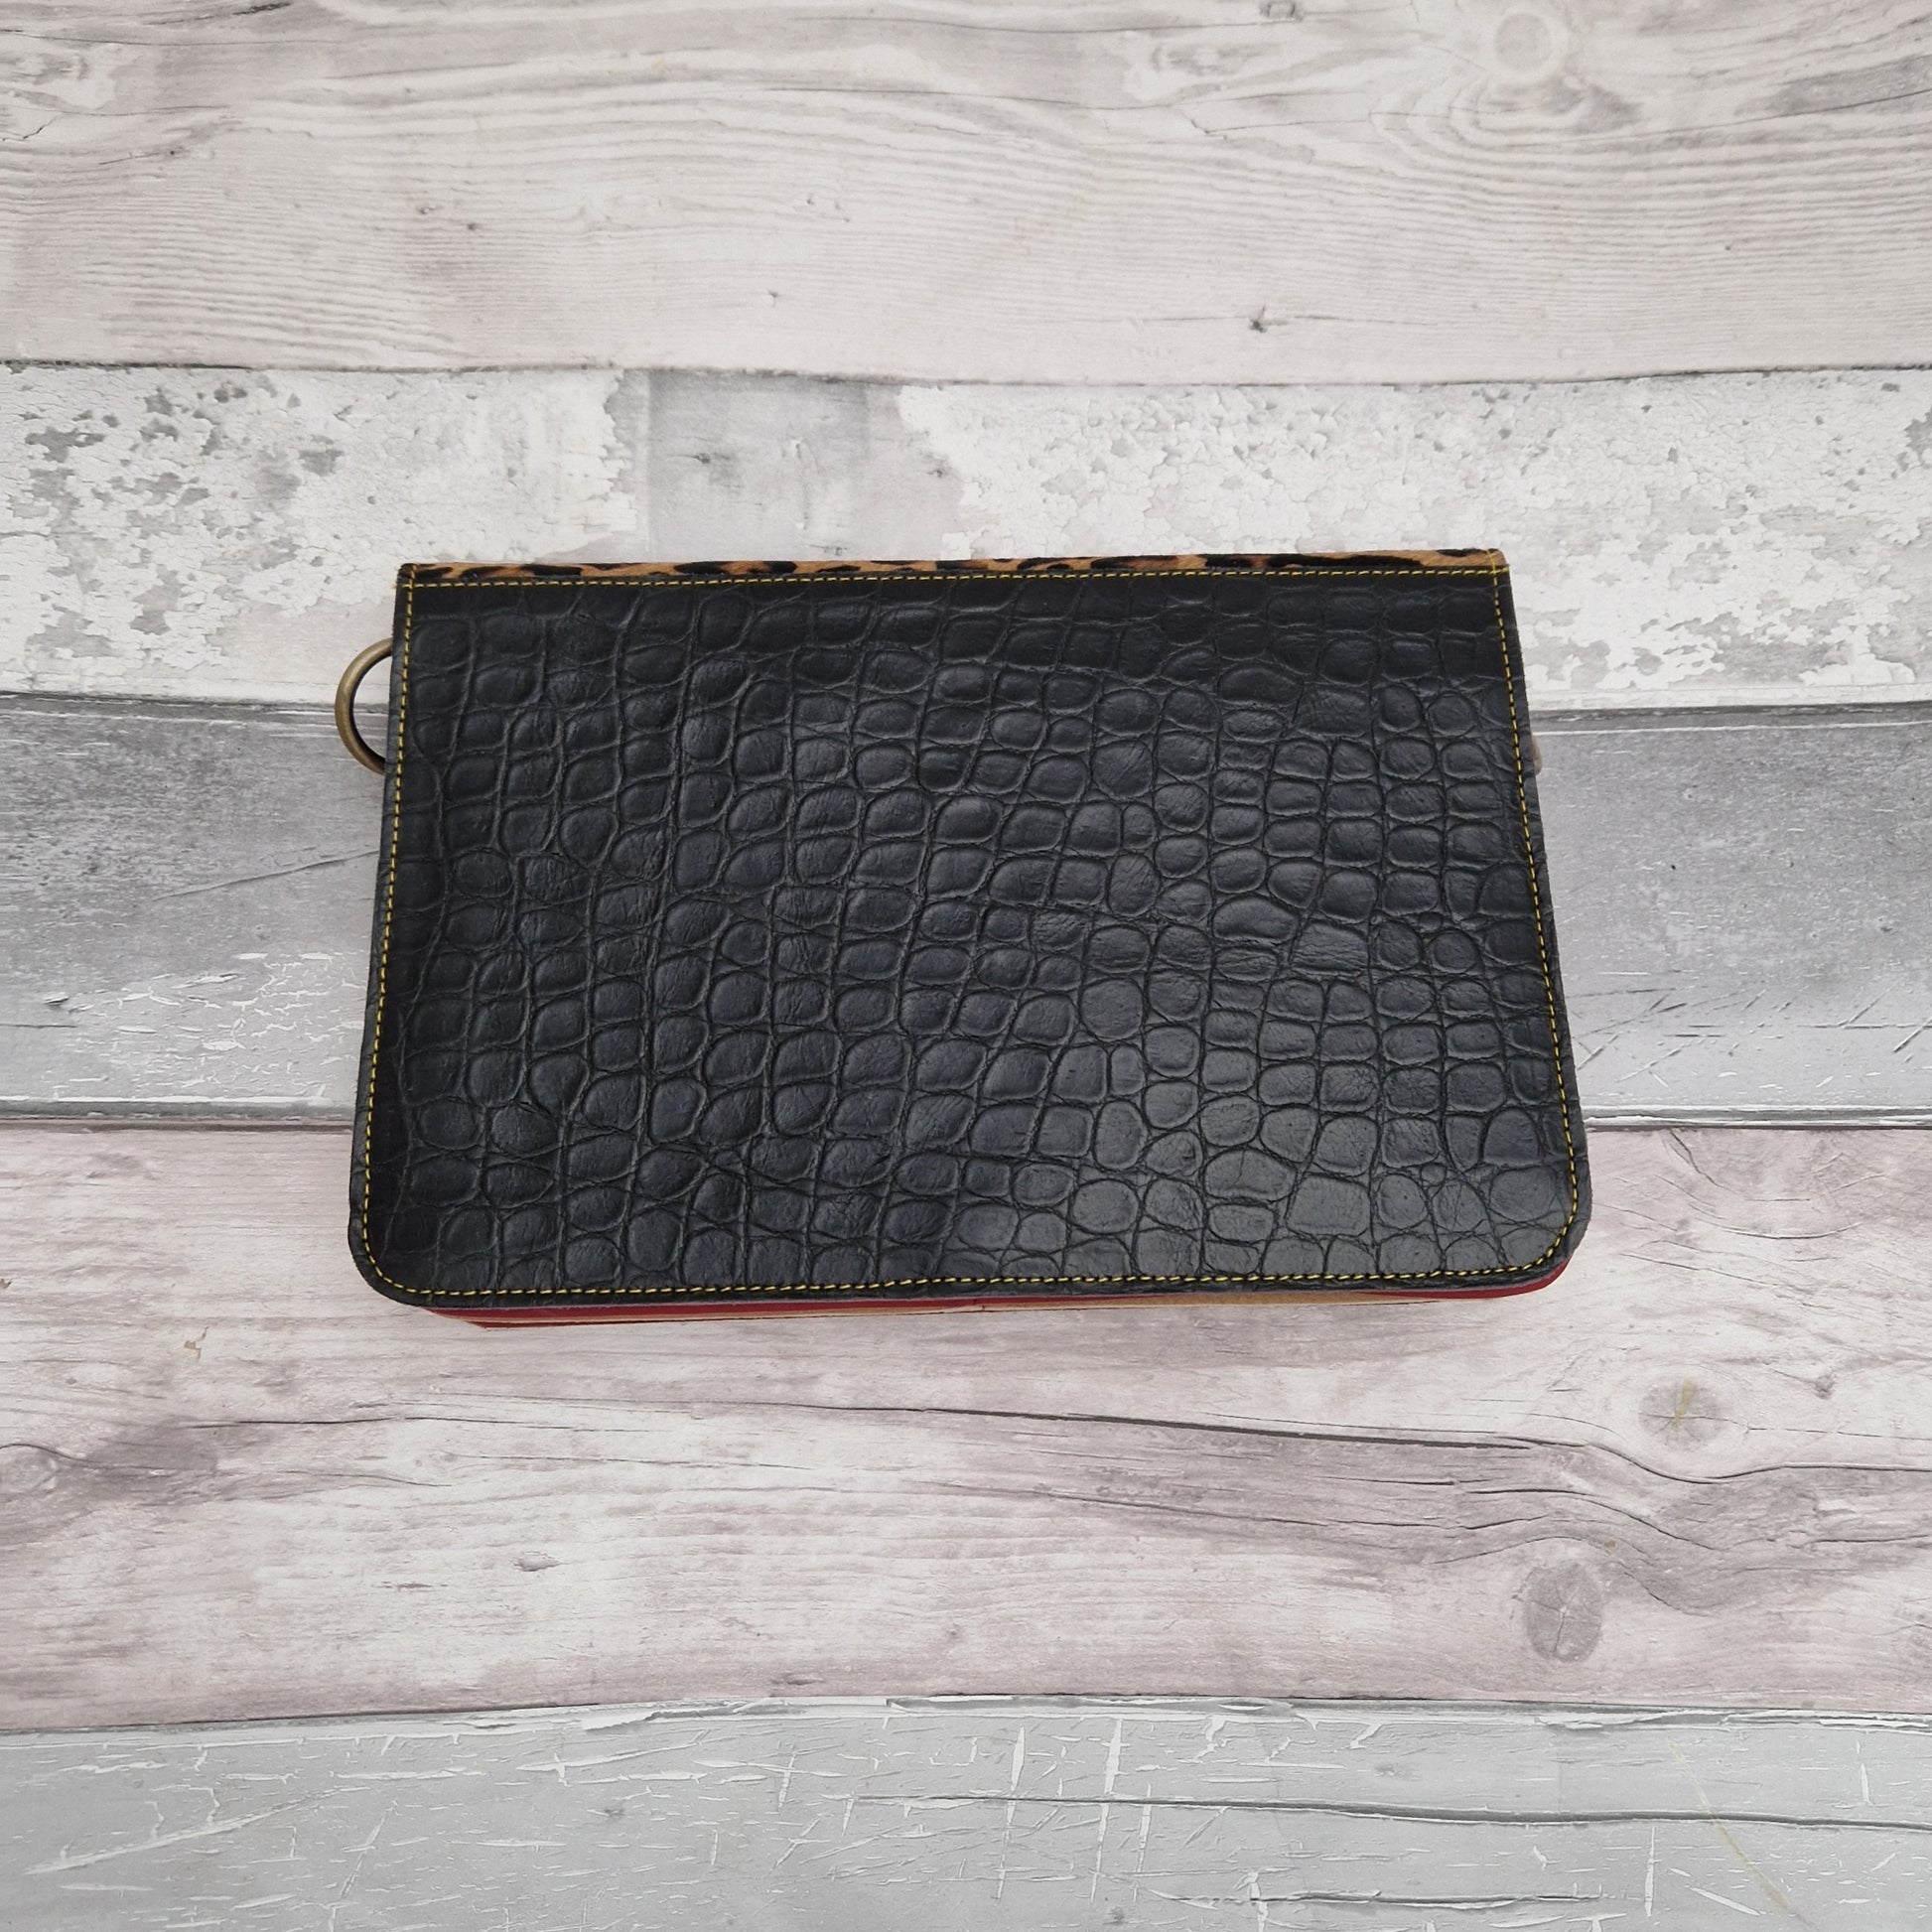 Black leather handbag with a textured leopard print panel.